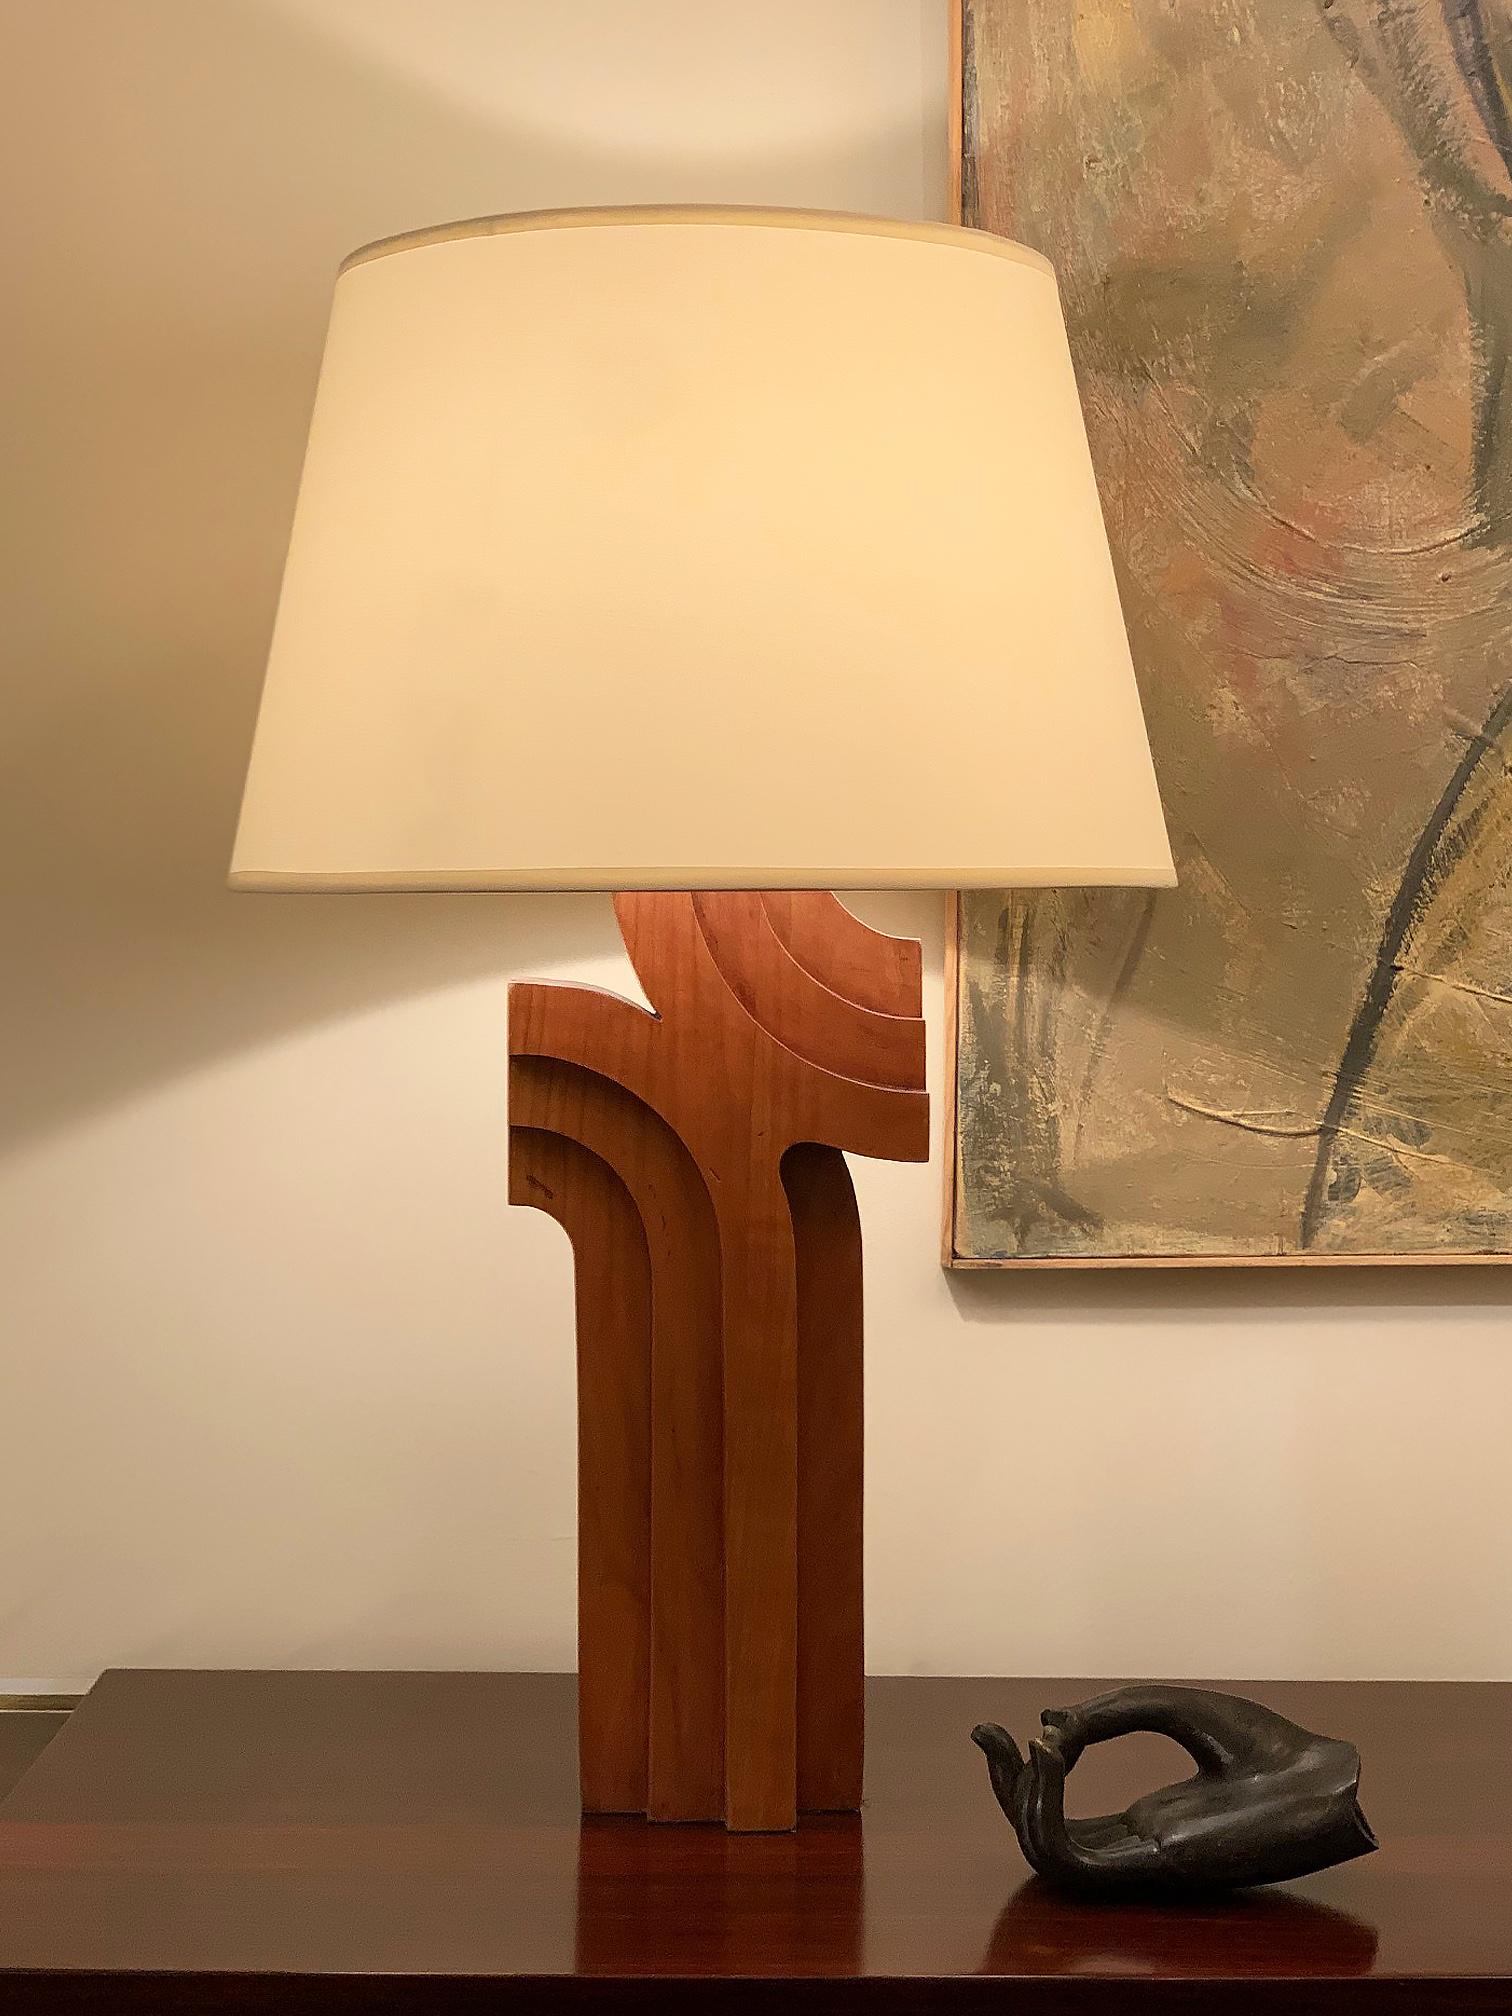 A carved wood sculptural table lamp.
France, circa 1970.
Measures: With the shade: 66 cm tall by 41 cm diameter.
Lamp base only: 47 cm tall by 18 cm wide.